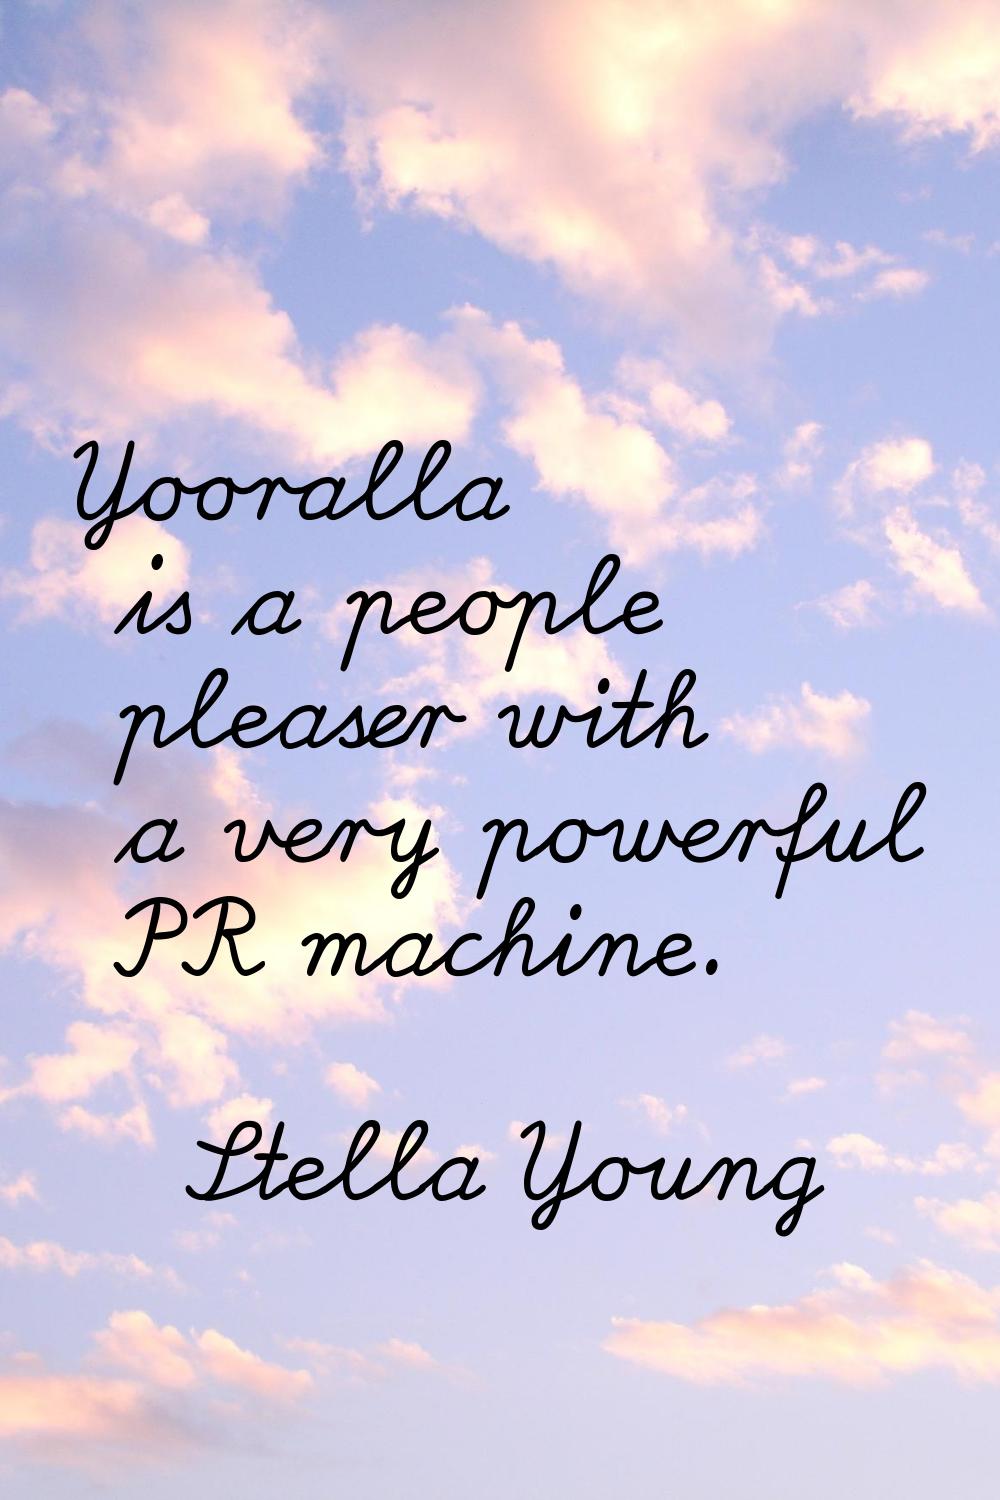 Yooralla is a people pleaser with a very powerful PR machine.